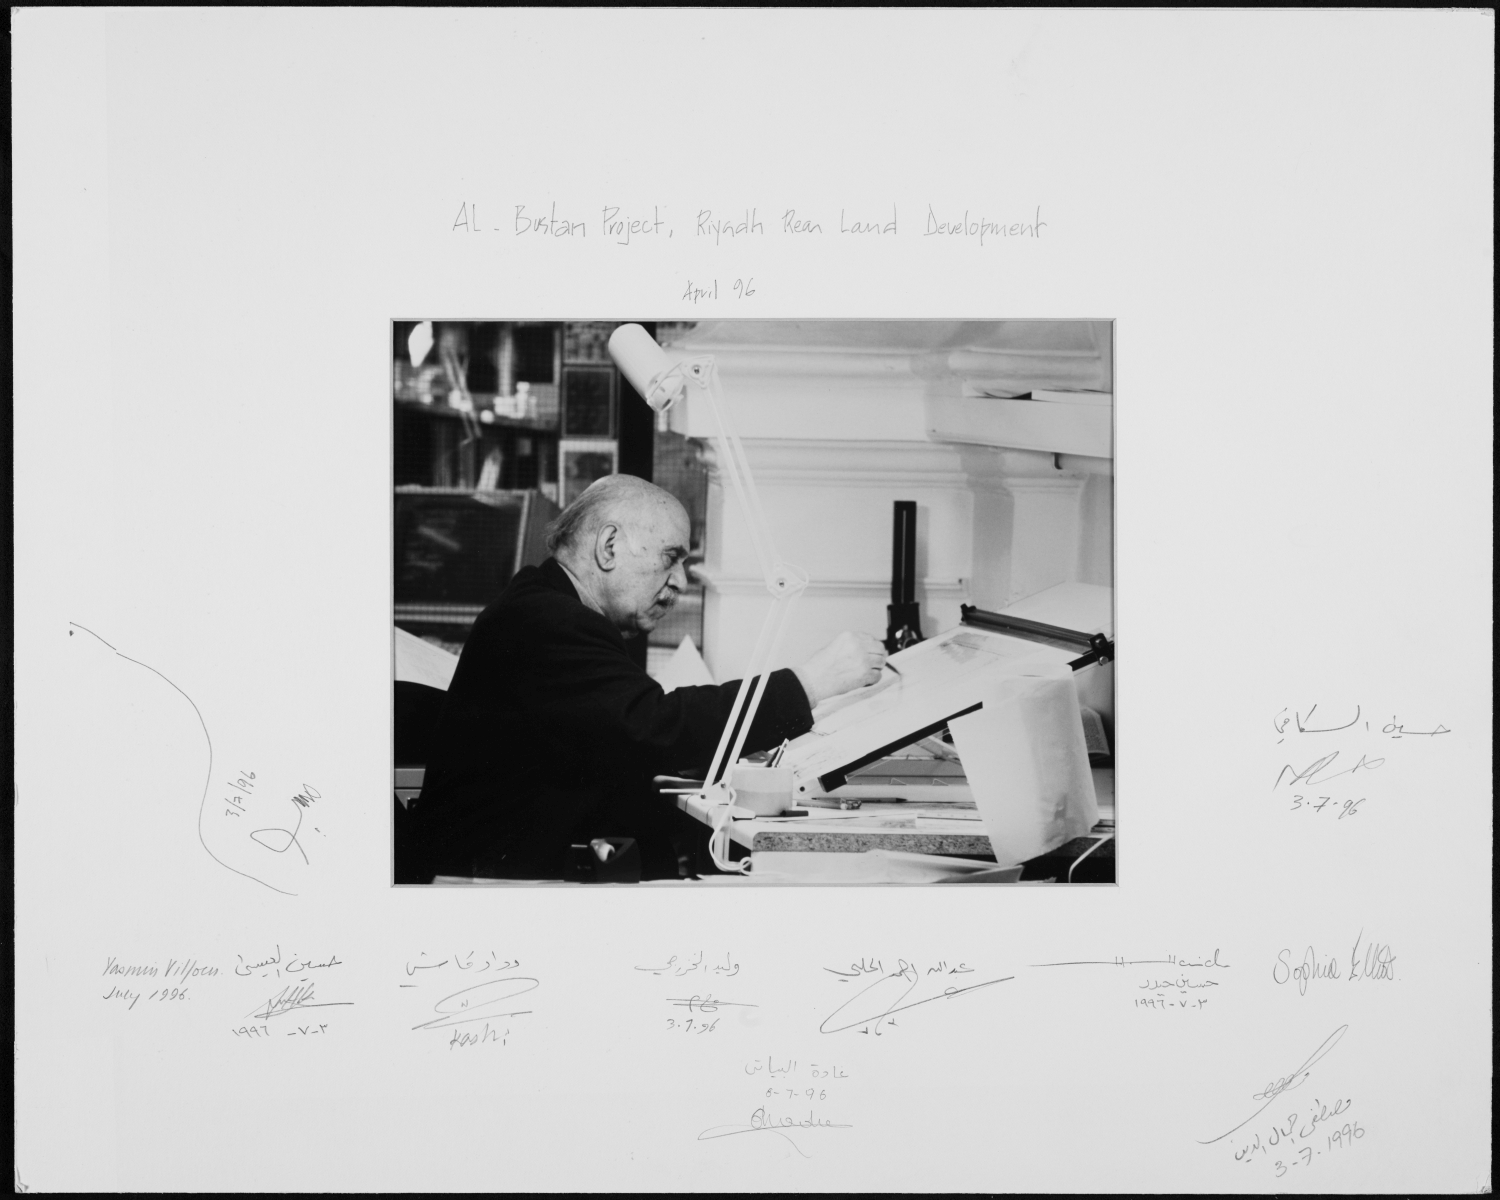 <p>April 1996 photo board showing Makiya at his drawing table, signed by staff members in commemoration of the Al-Bustan Project, Riyadh Rear Land Development</p>